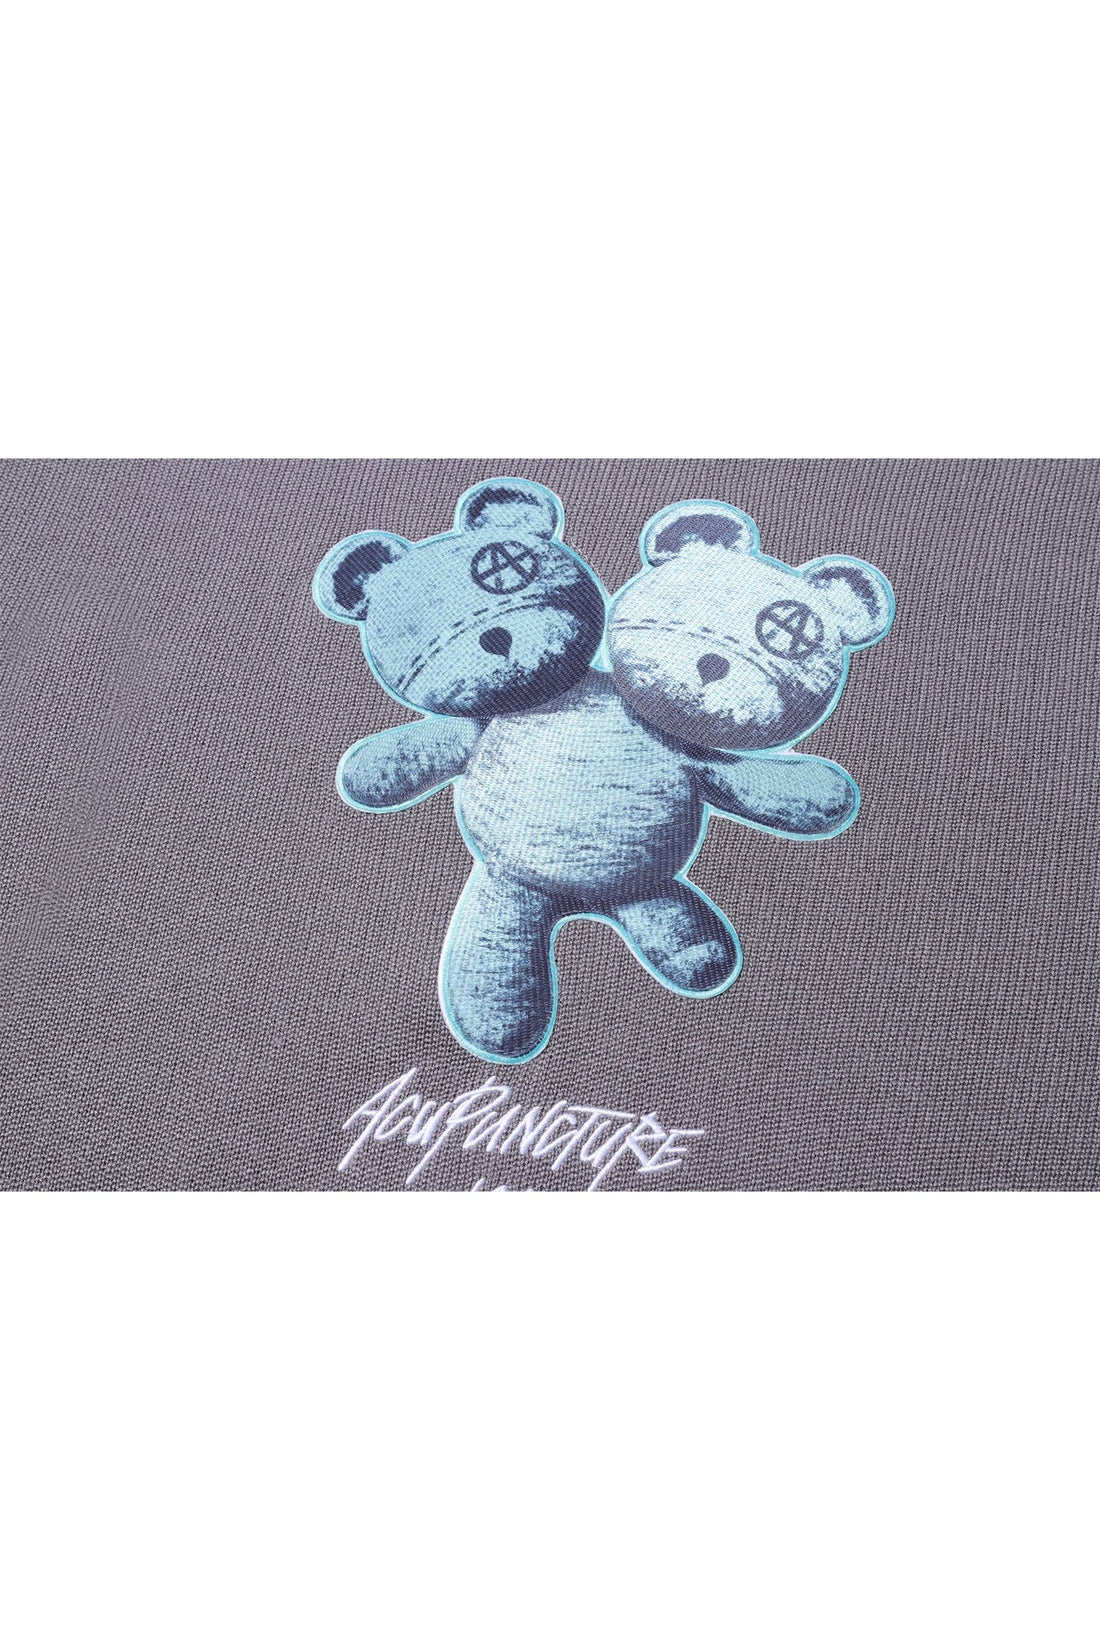 BEAR SWEATER GREY Acupuncture